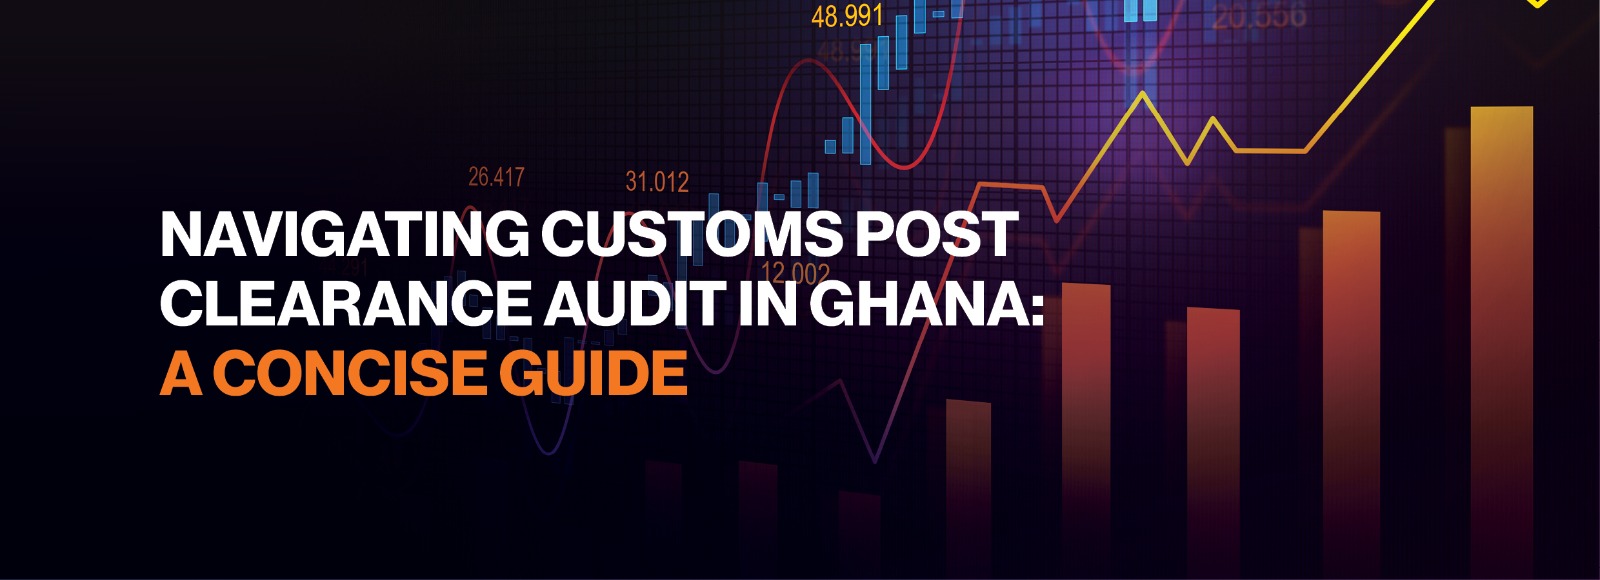 Navigating Customs Post Clearance Audit in Ghana: A Concise Guide